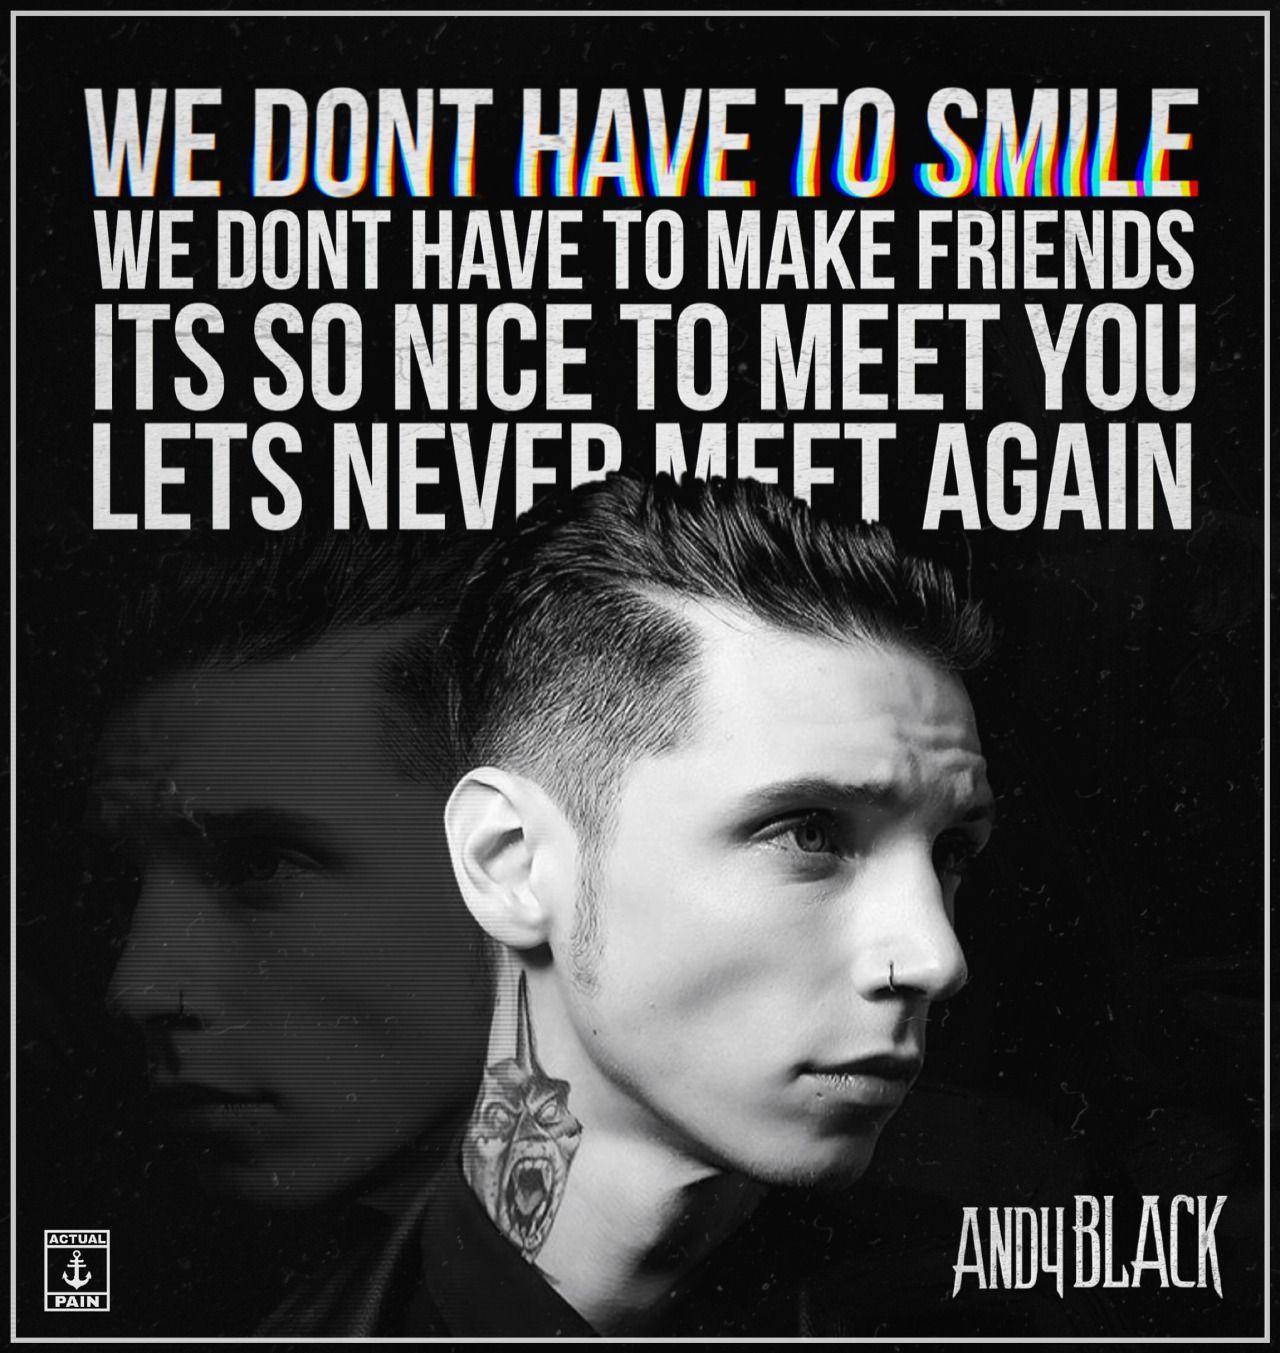 Andy Black Wallpaper. Either Ribcage or Homecoming King